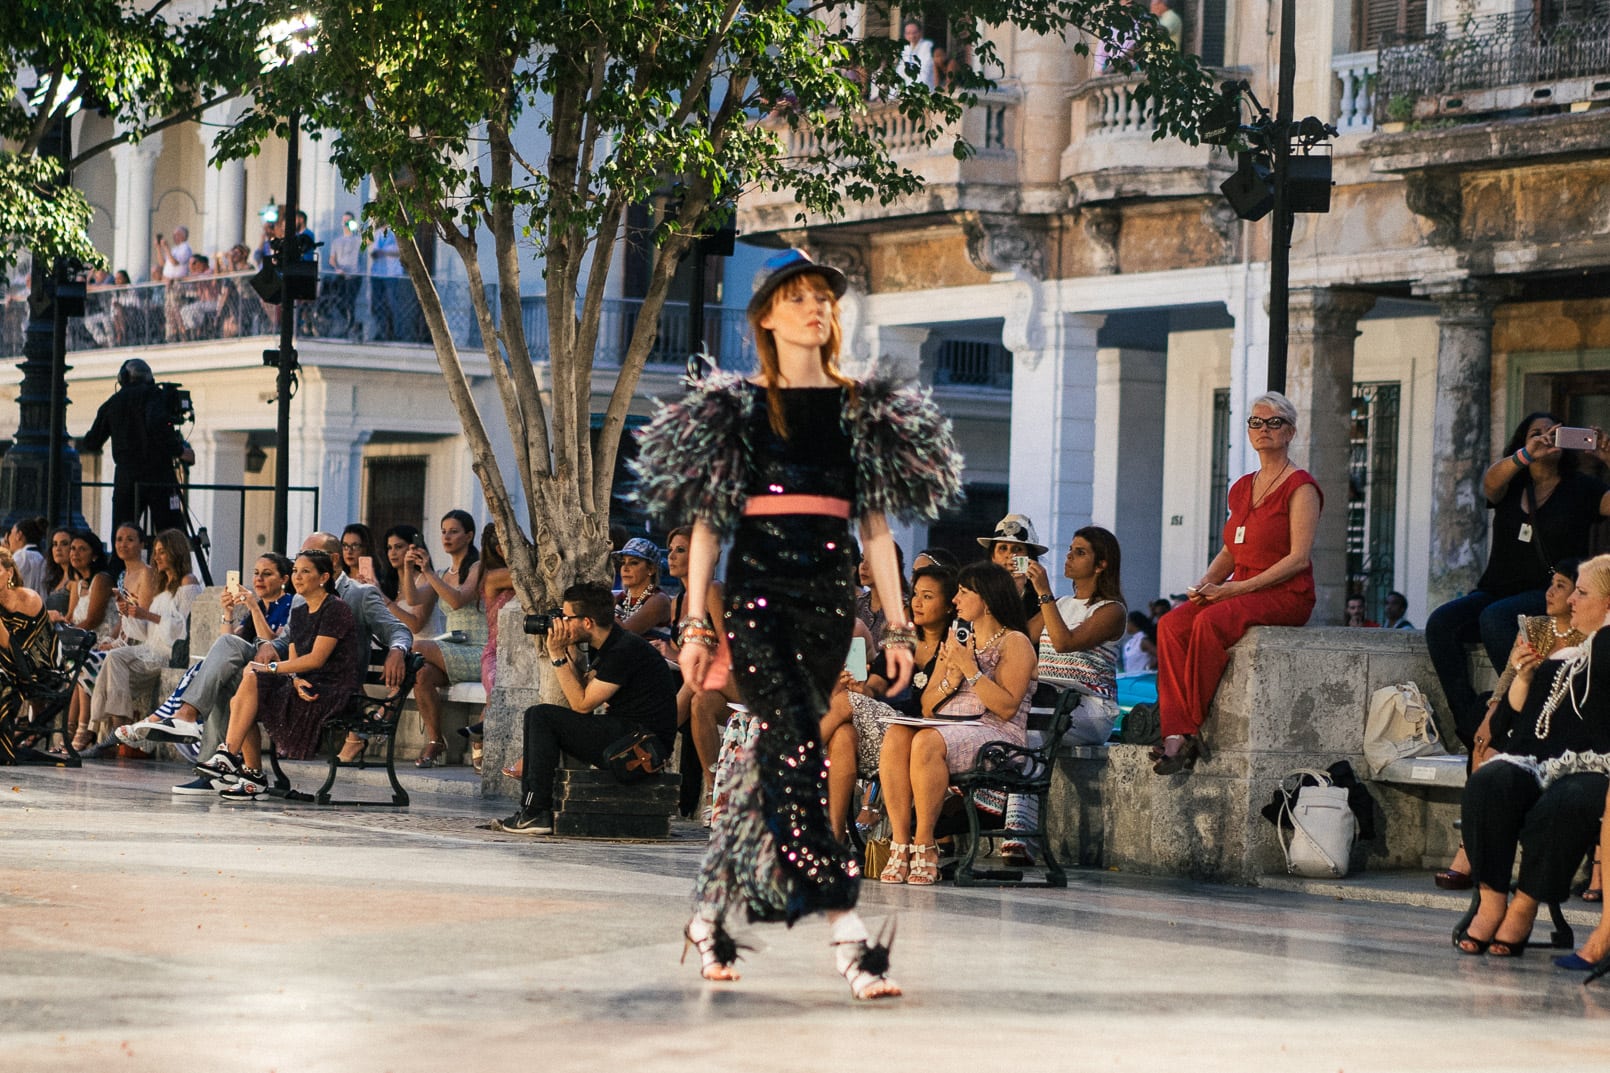 Chanel Cruise Cuba, Pam Hetlinger, The Girl From Panama, Chanel's Cruise Show in Cuba